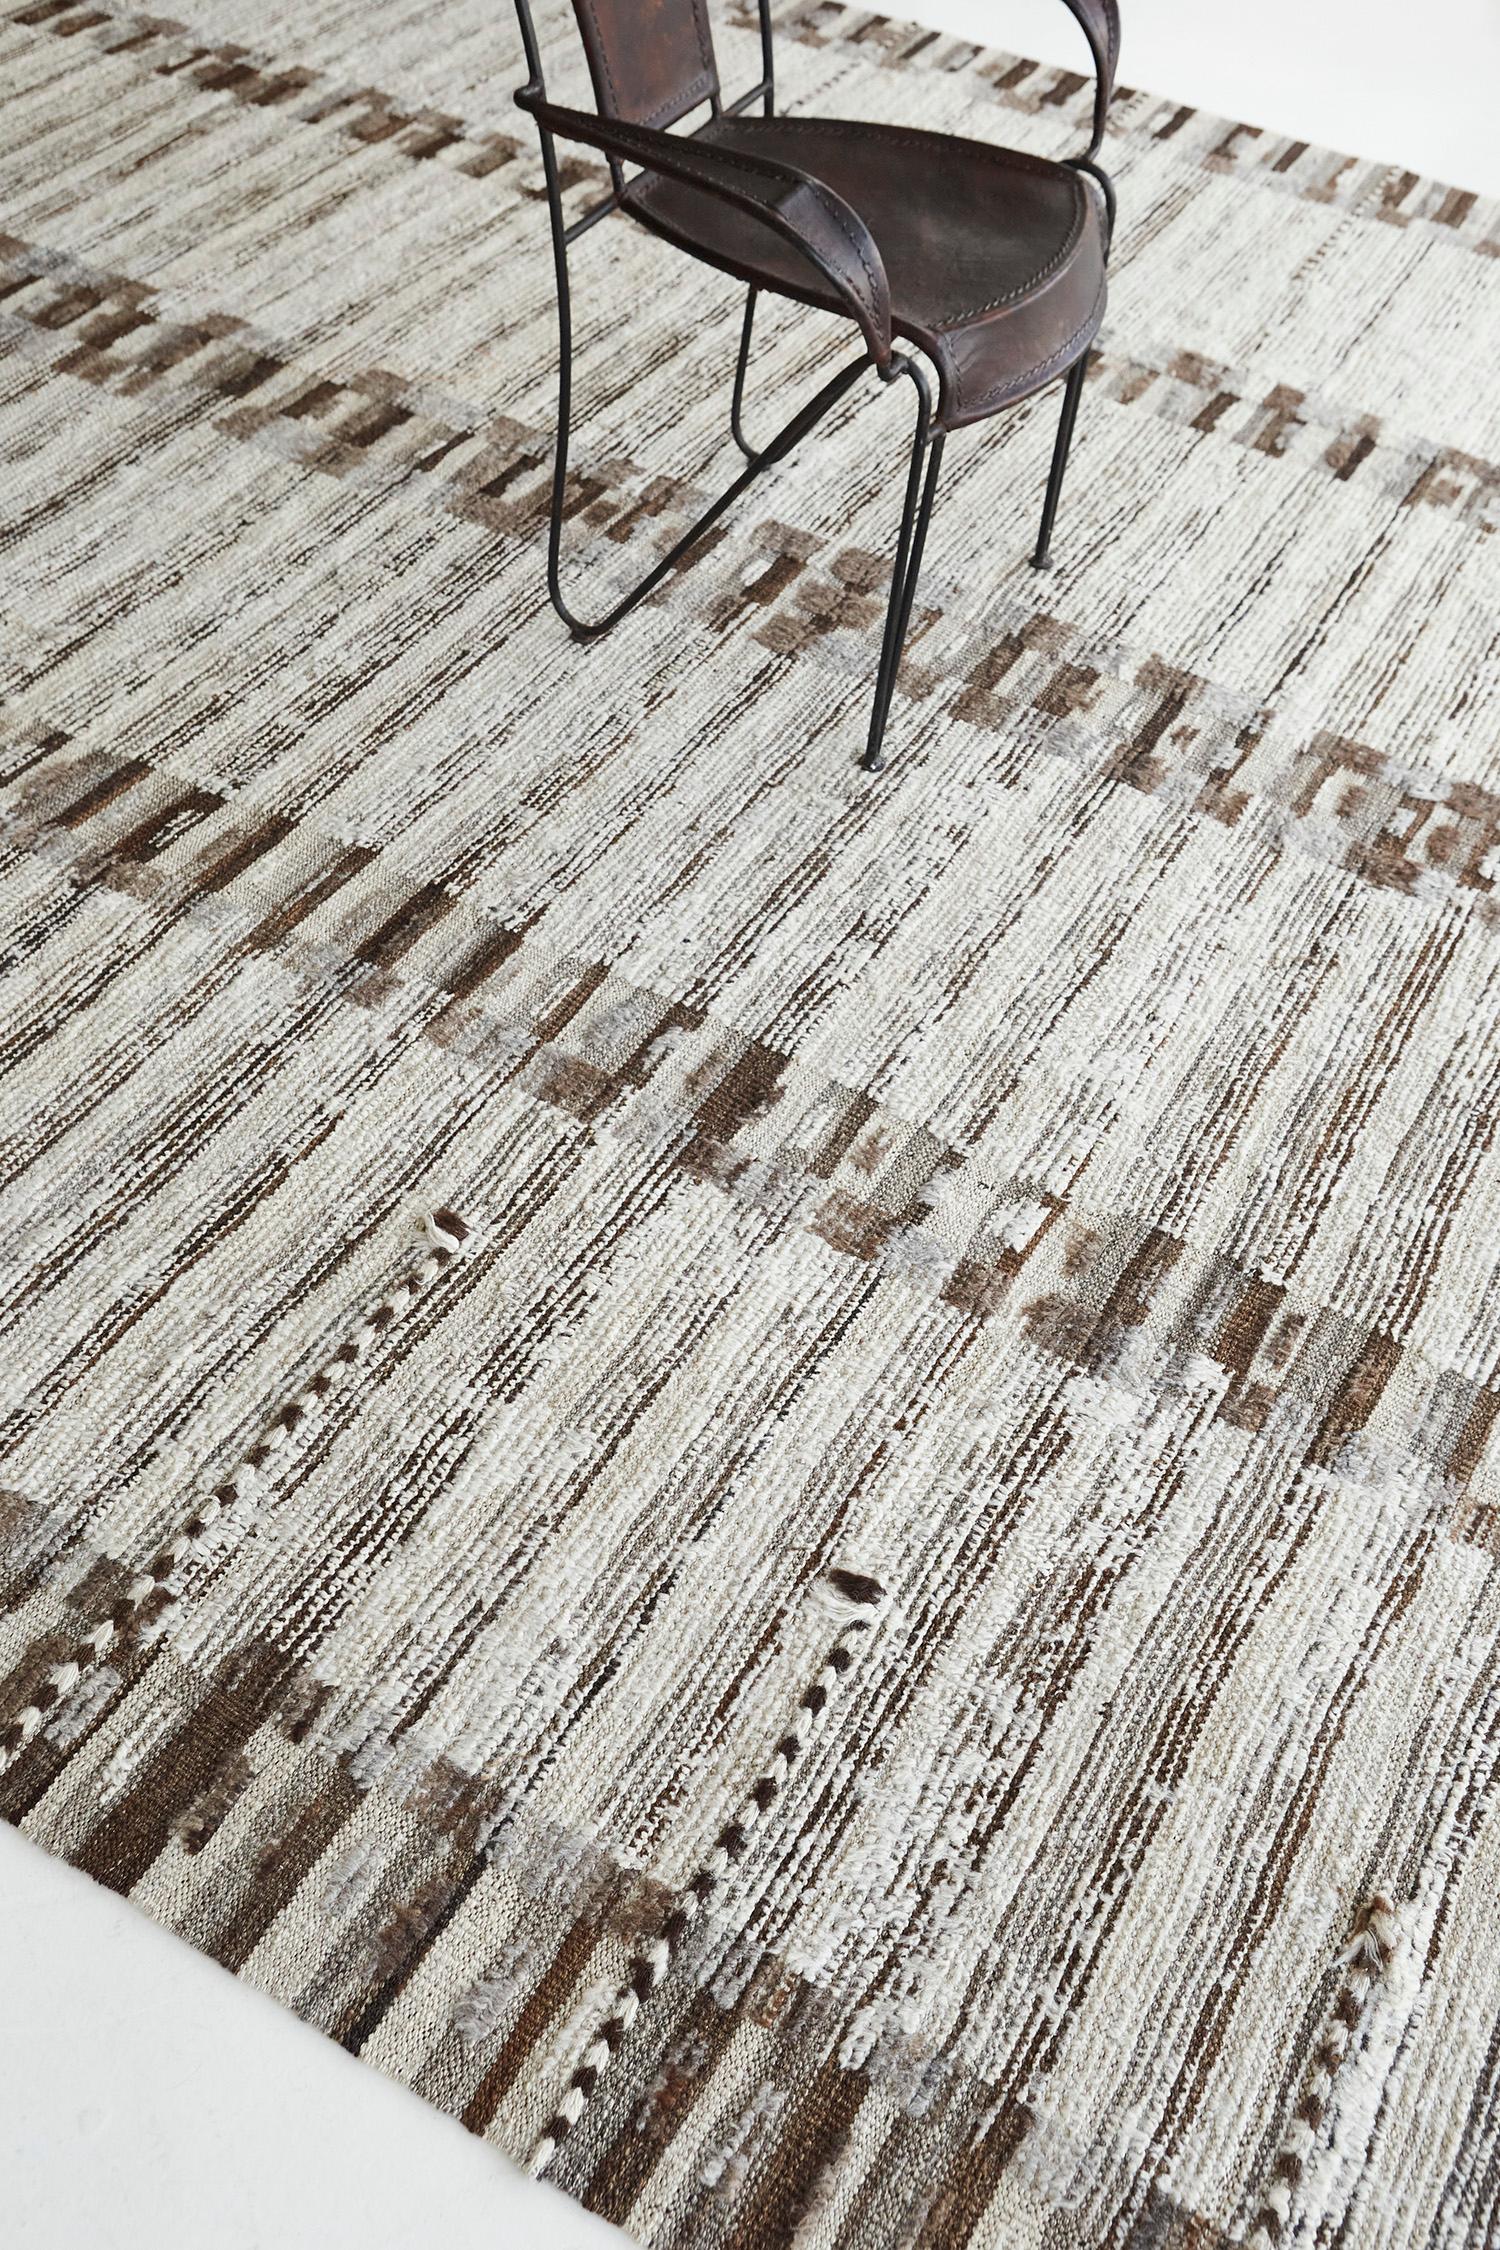 Tafsut is a pile of woven wool that displays art and creativity. It features a natural contrast color scheme of natural brown. Visible abrash magnifies the rug's character and leaves an impression that surely a viewer cannot resist. A piece that is